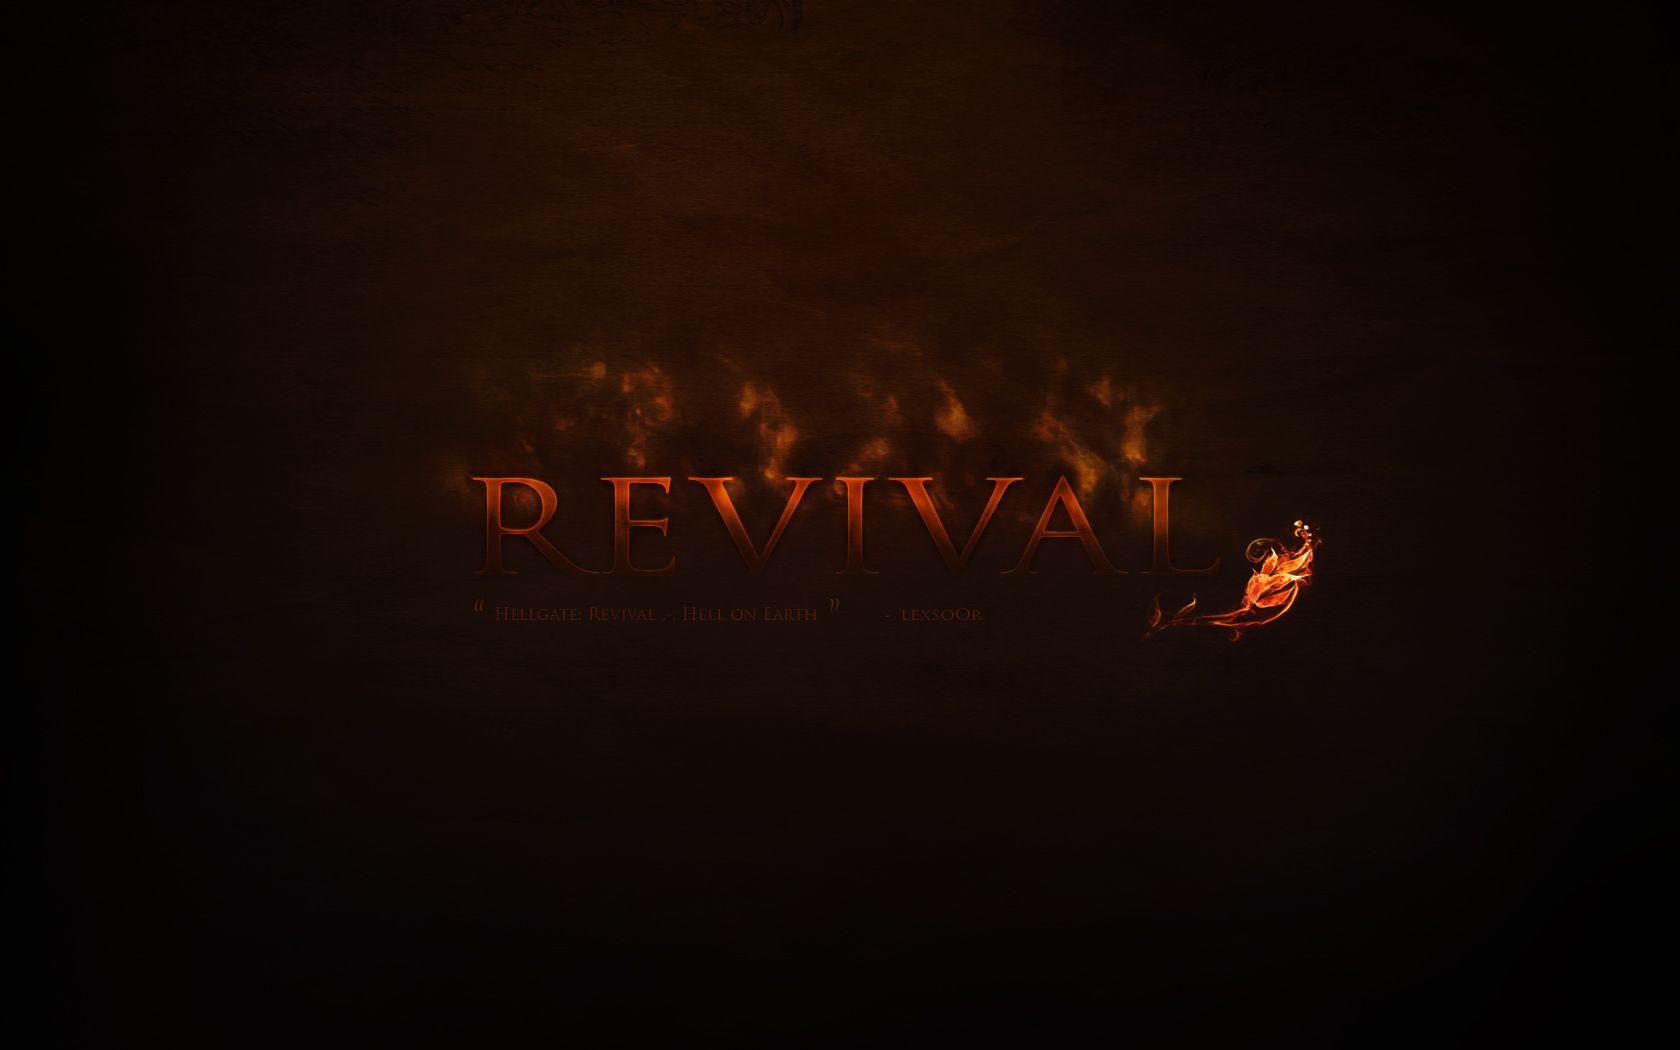 Revival Wallpapers